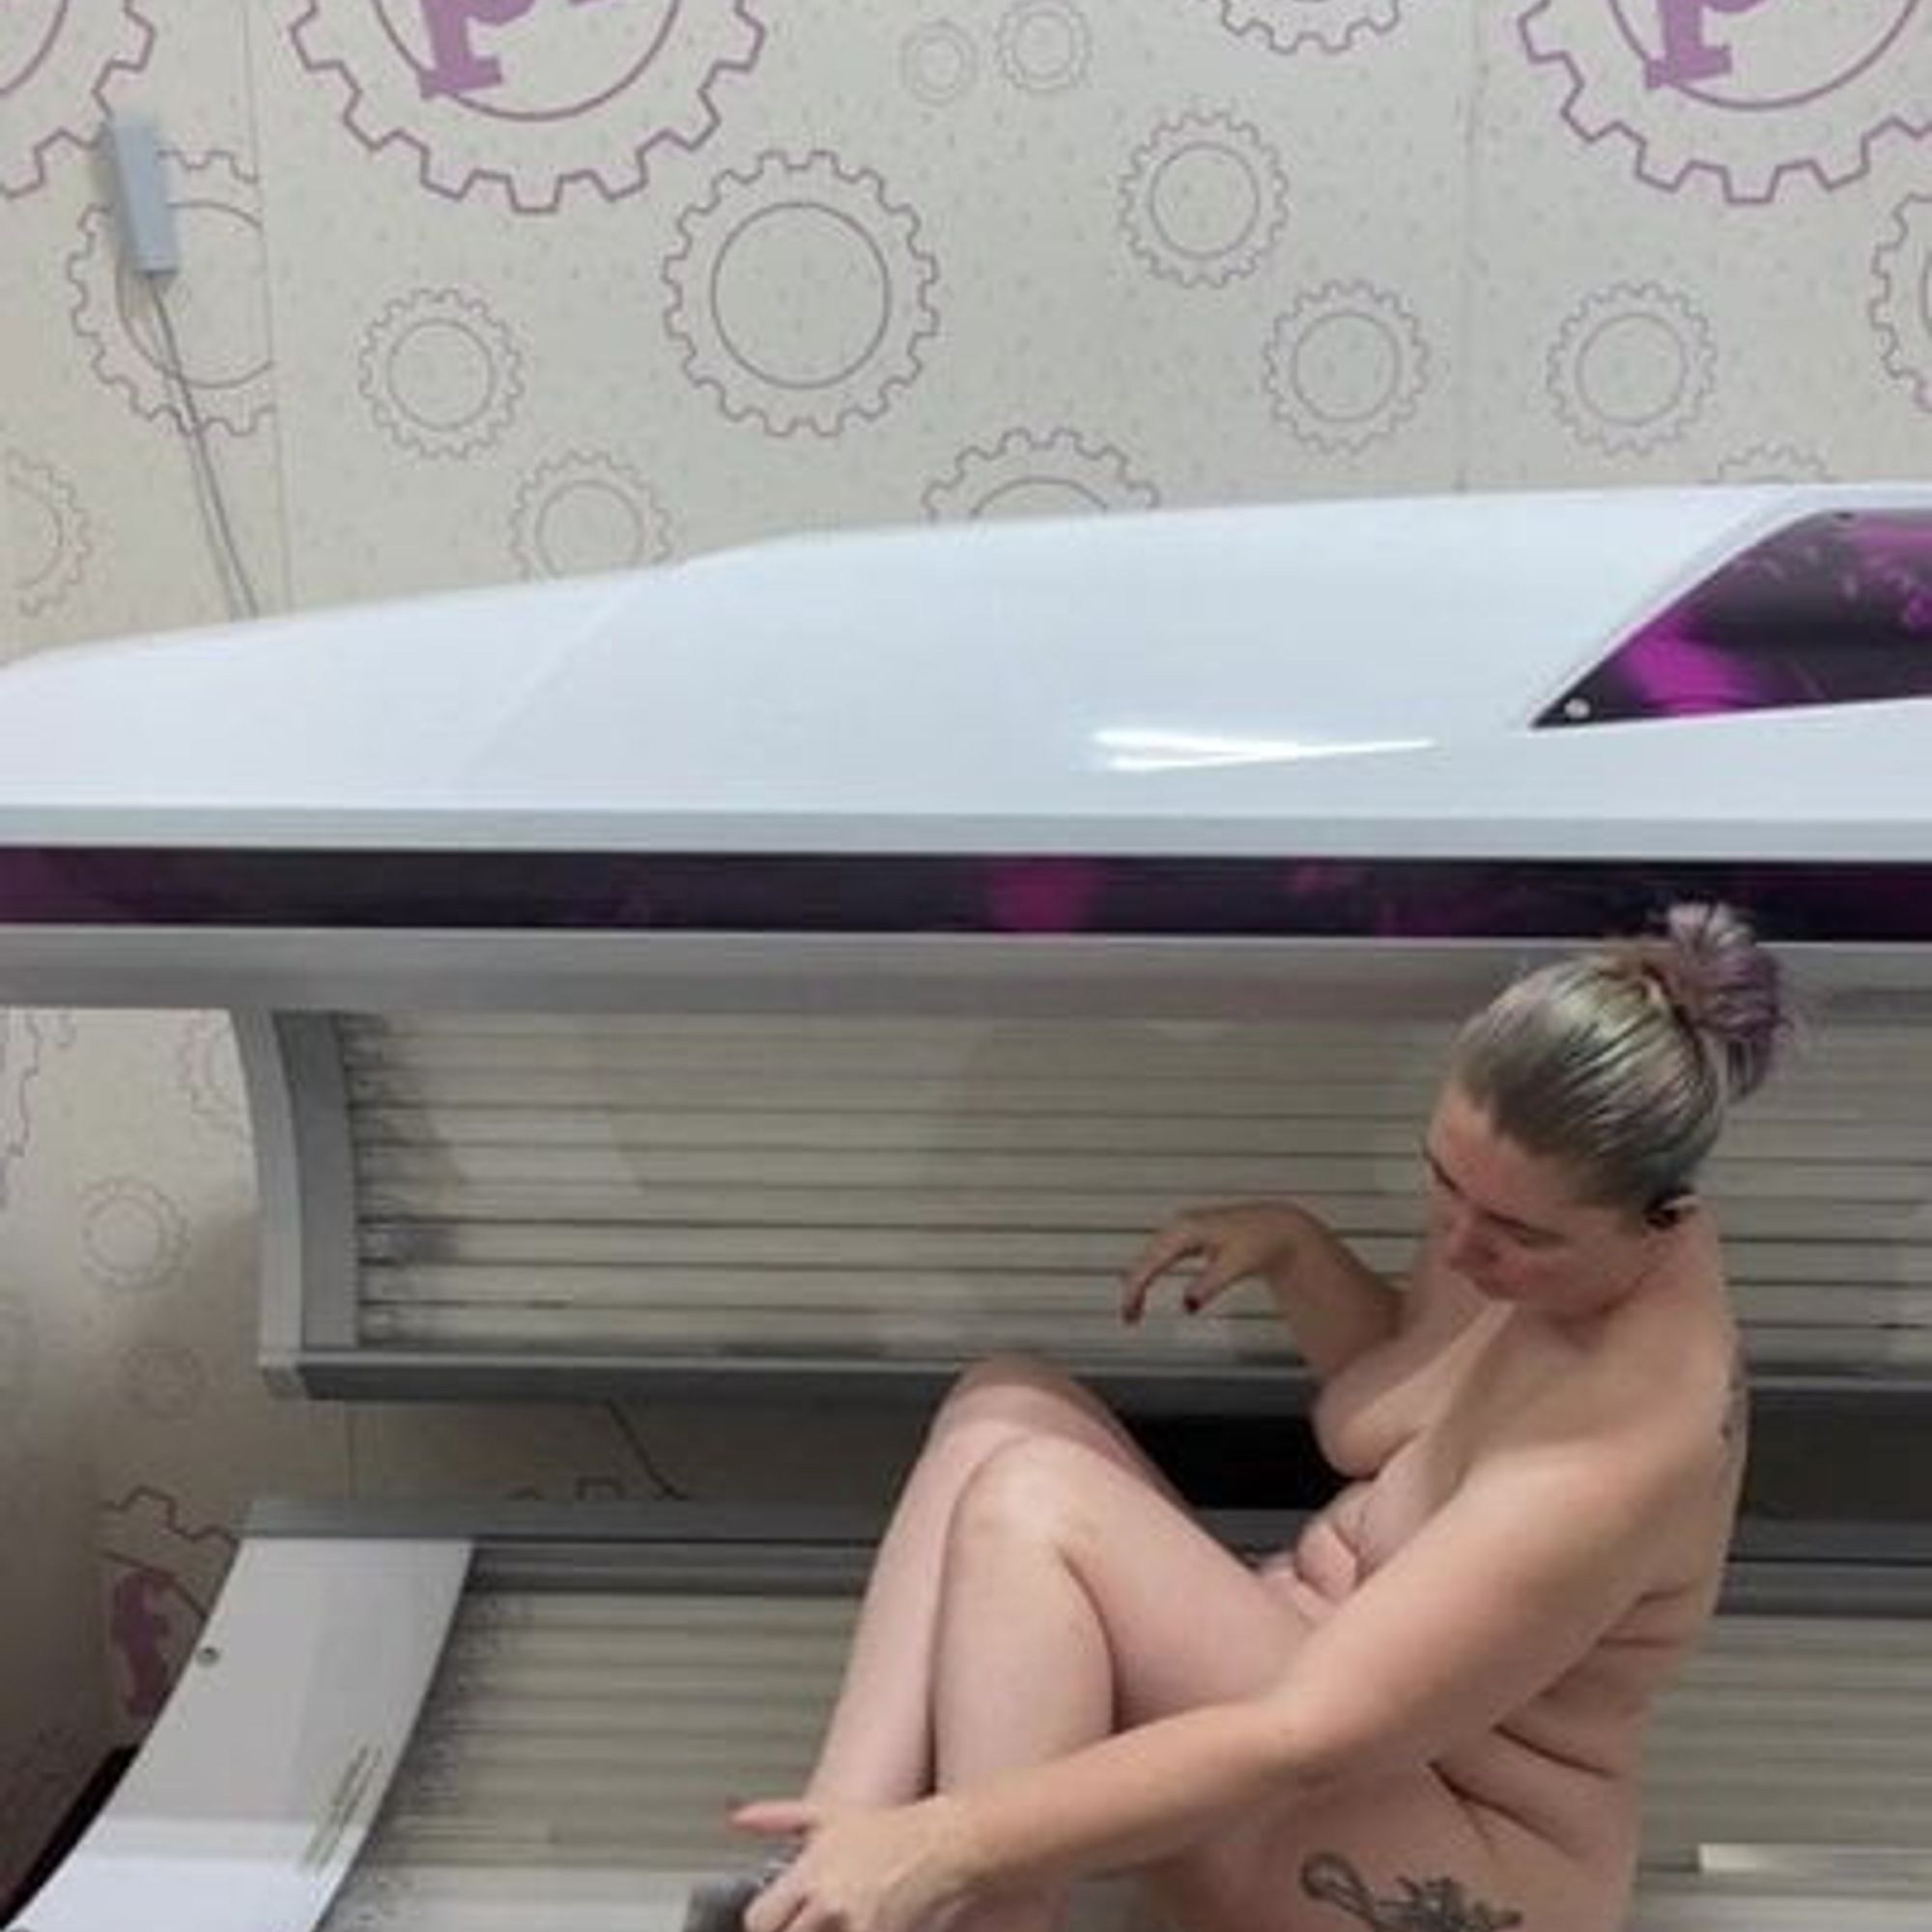 Camera in a tanning bed (81 photos)